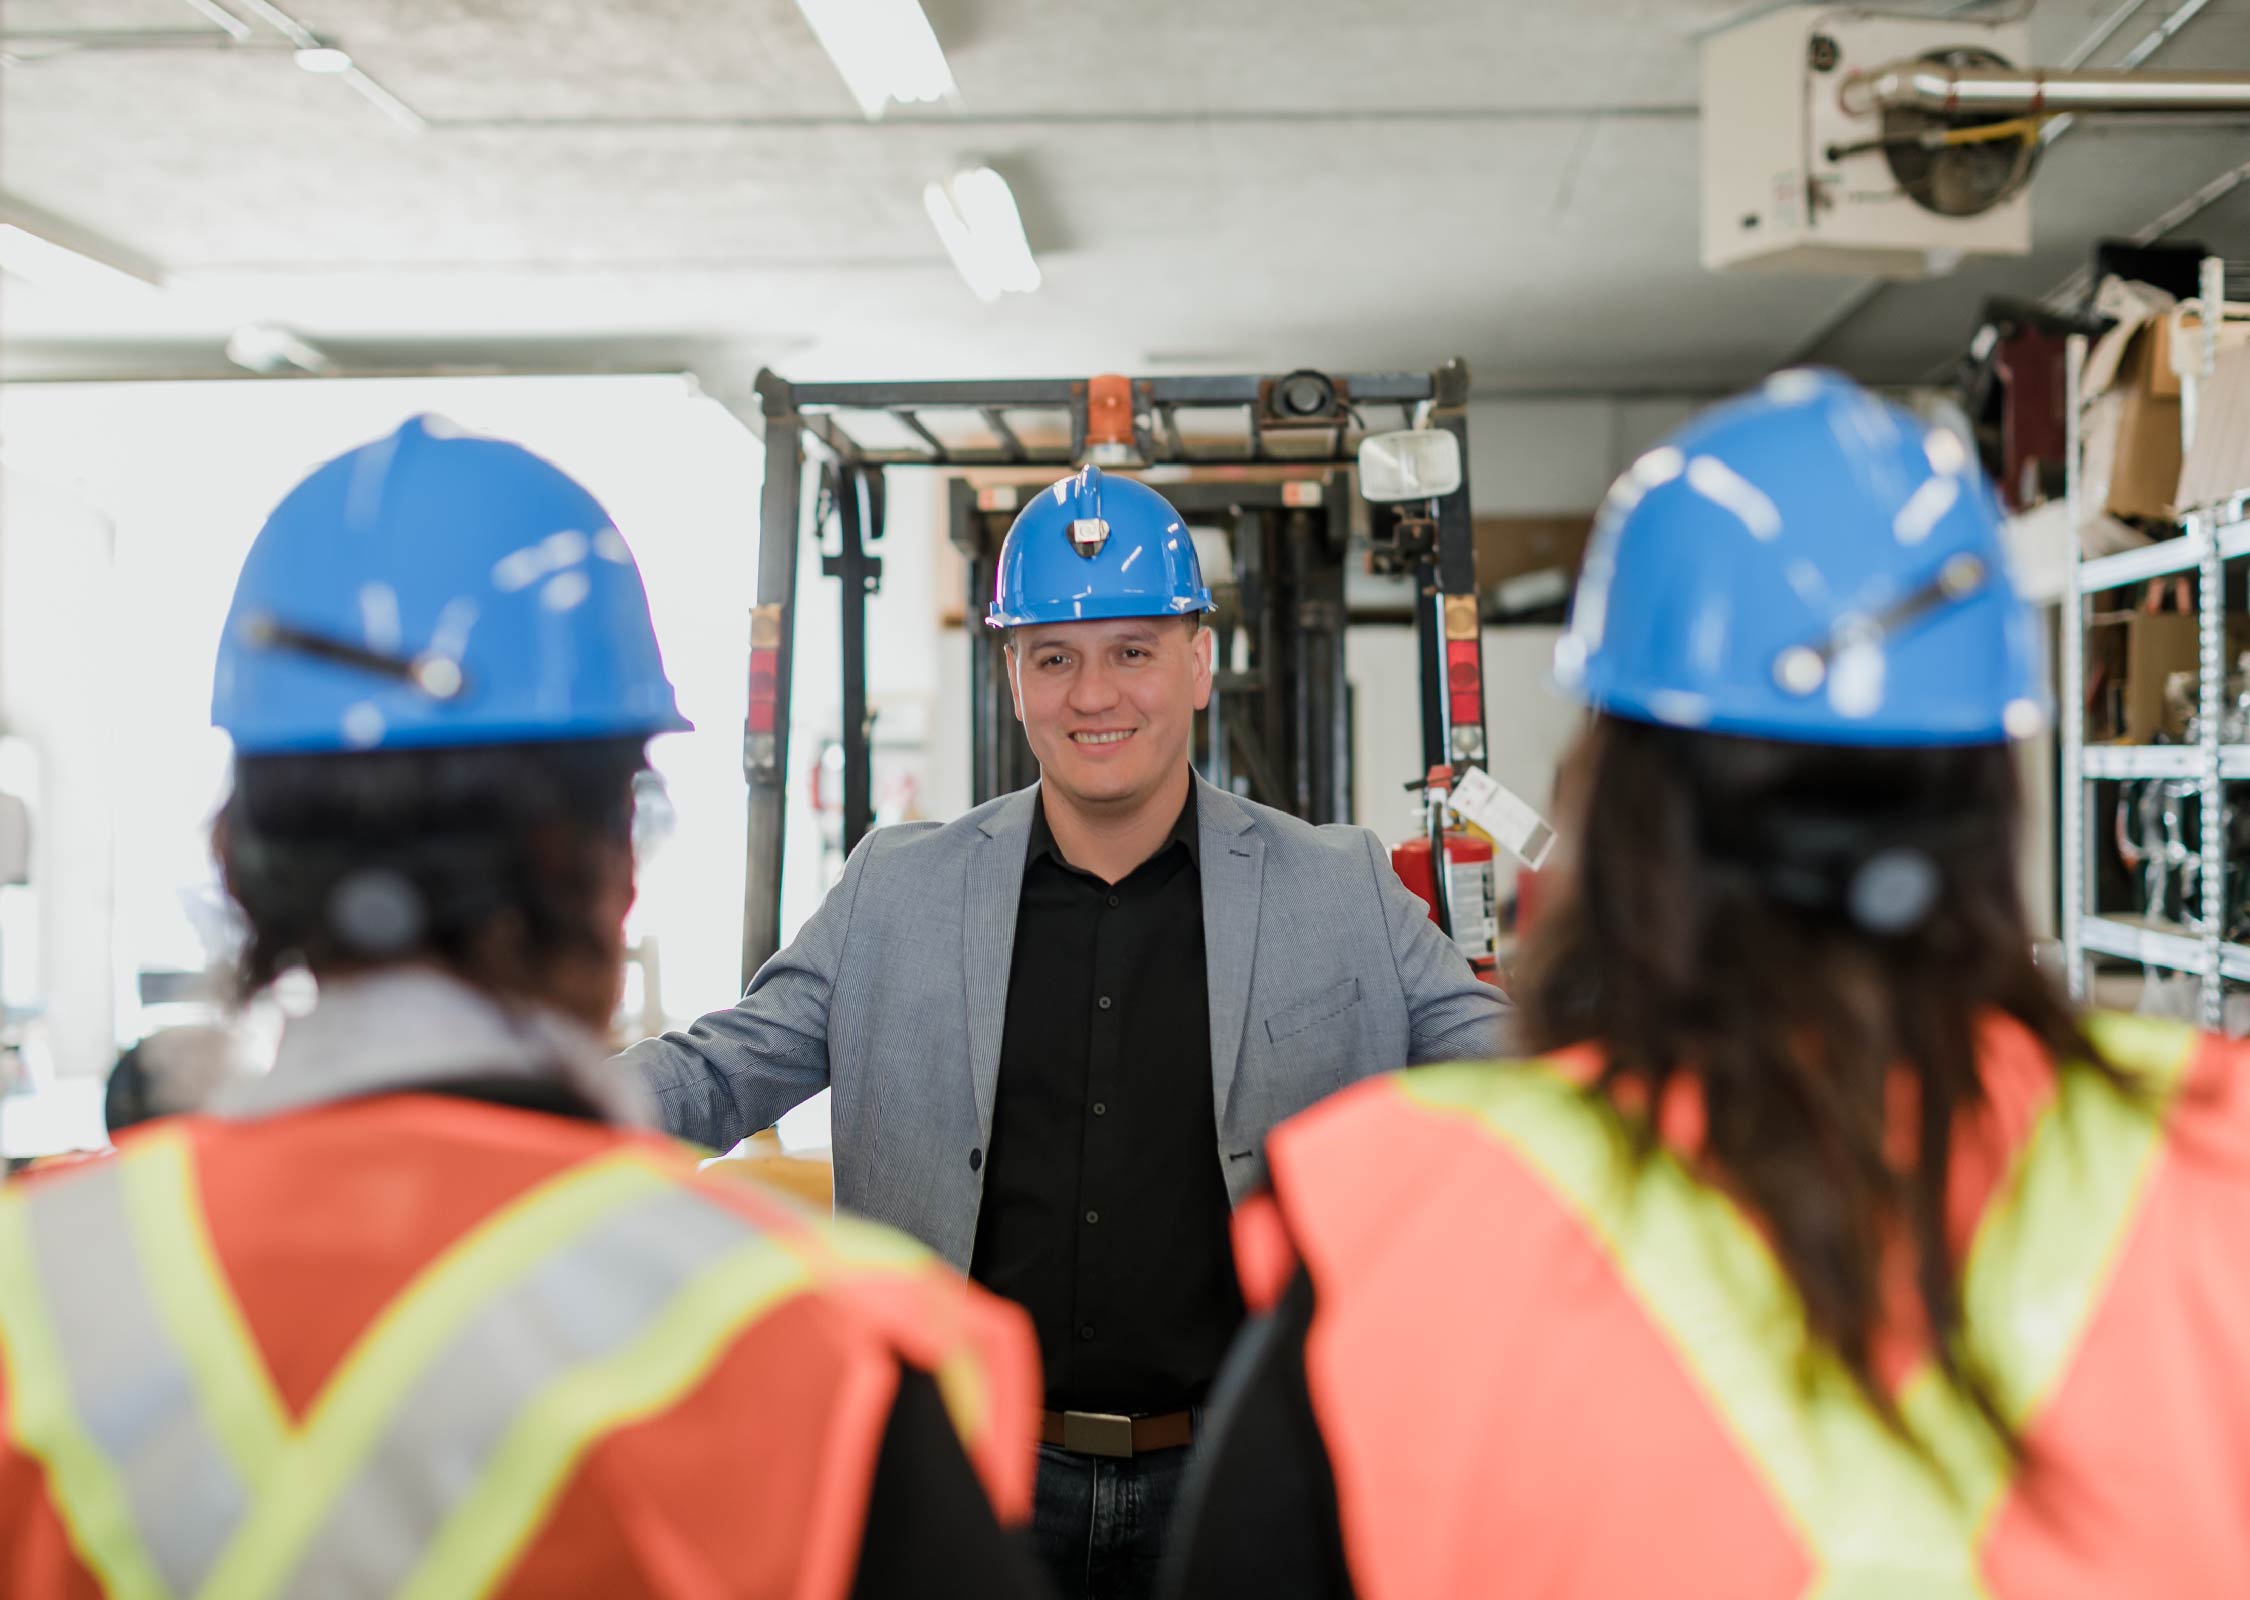 A man wearing a blue hard hat talks to two workers in a warehouse